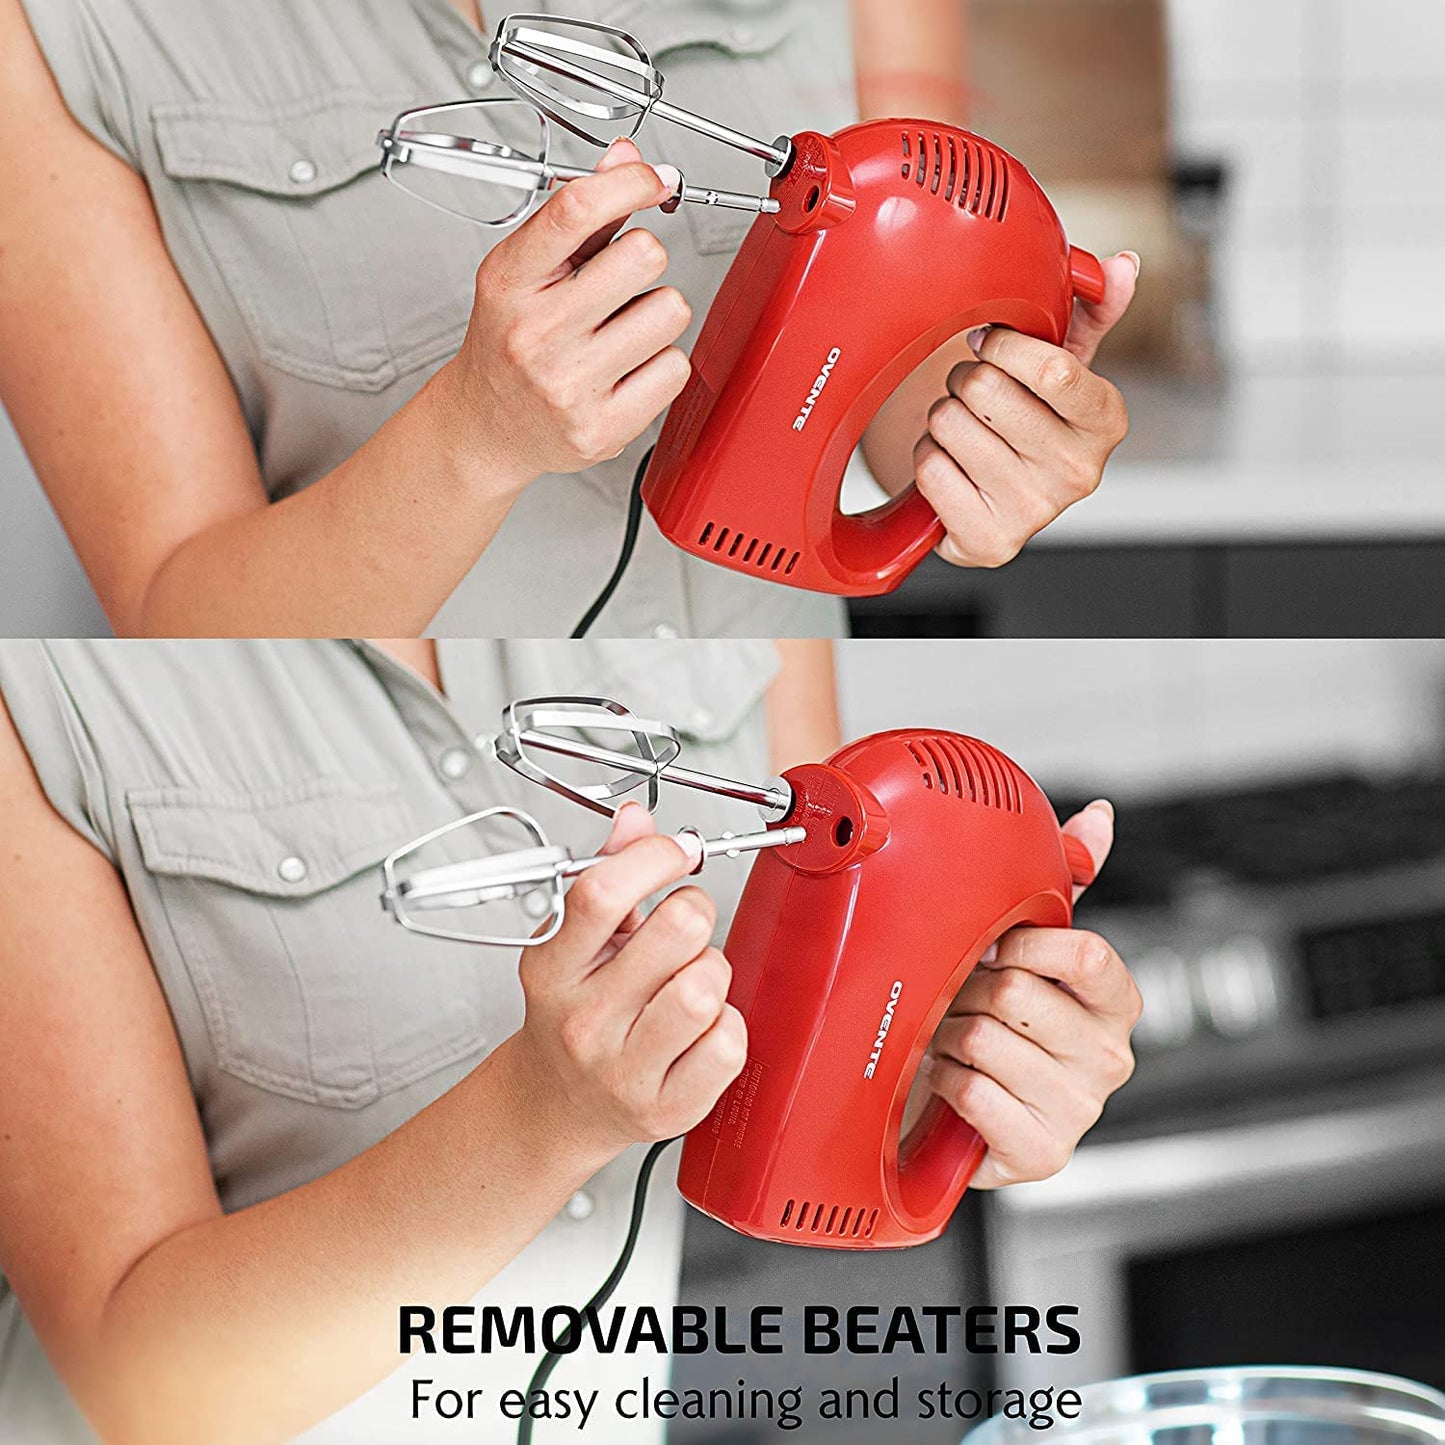 Compact and Powerful Electric Hand Mixer with Stainless Steel Whisk Beater Attachments, Snap Storage Case, and 5 Speed Mixing Functionality 150 Watt, Red